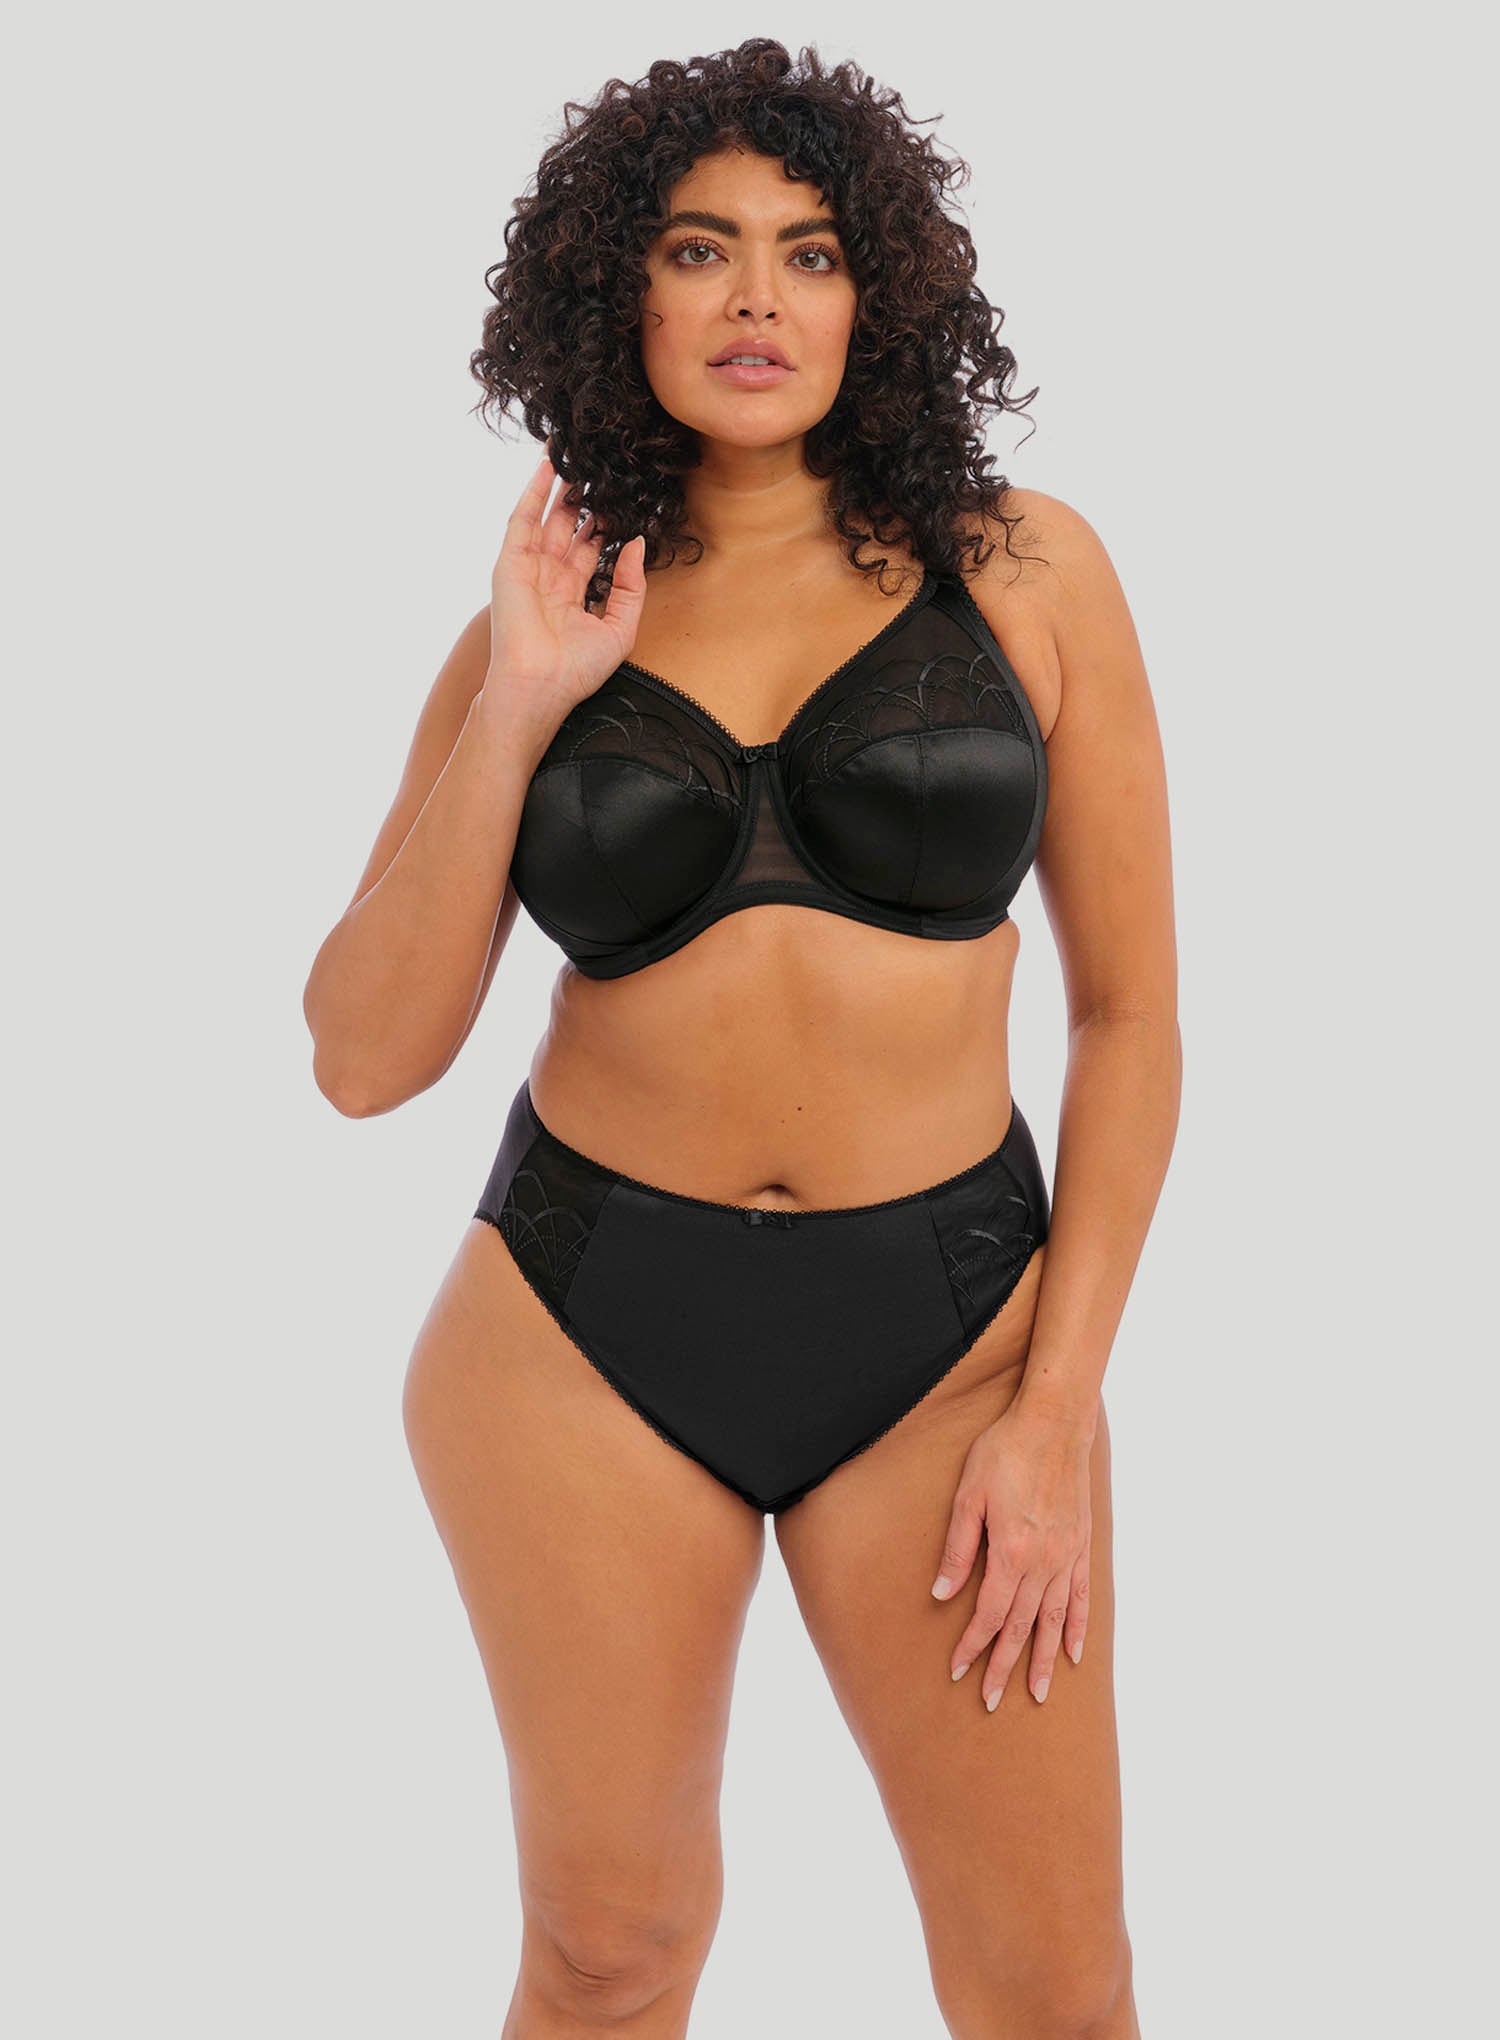 ELOMI CATE FULL CUP UNDERWIRE BRA - LATTE – Tops & Bottoms